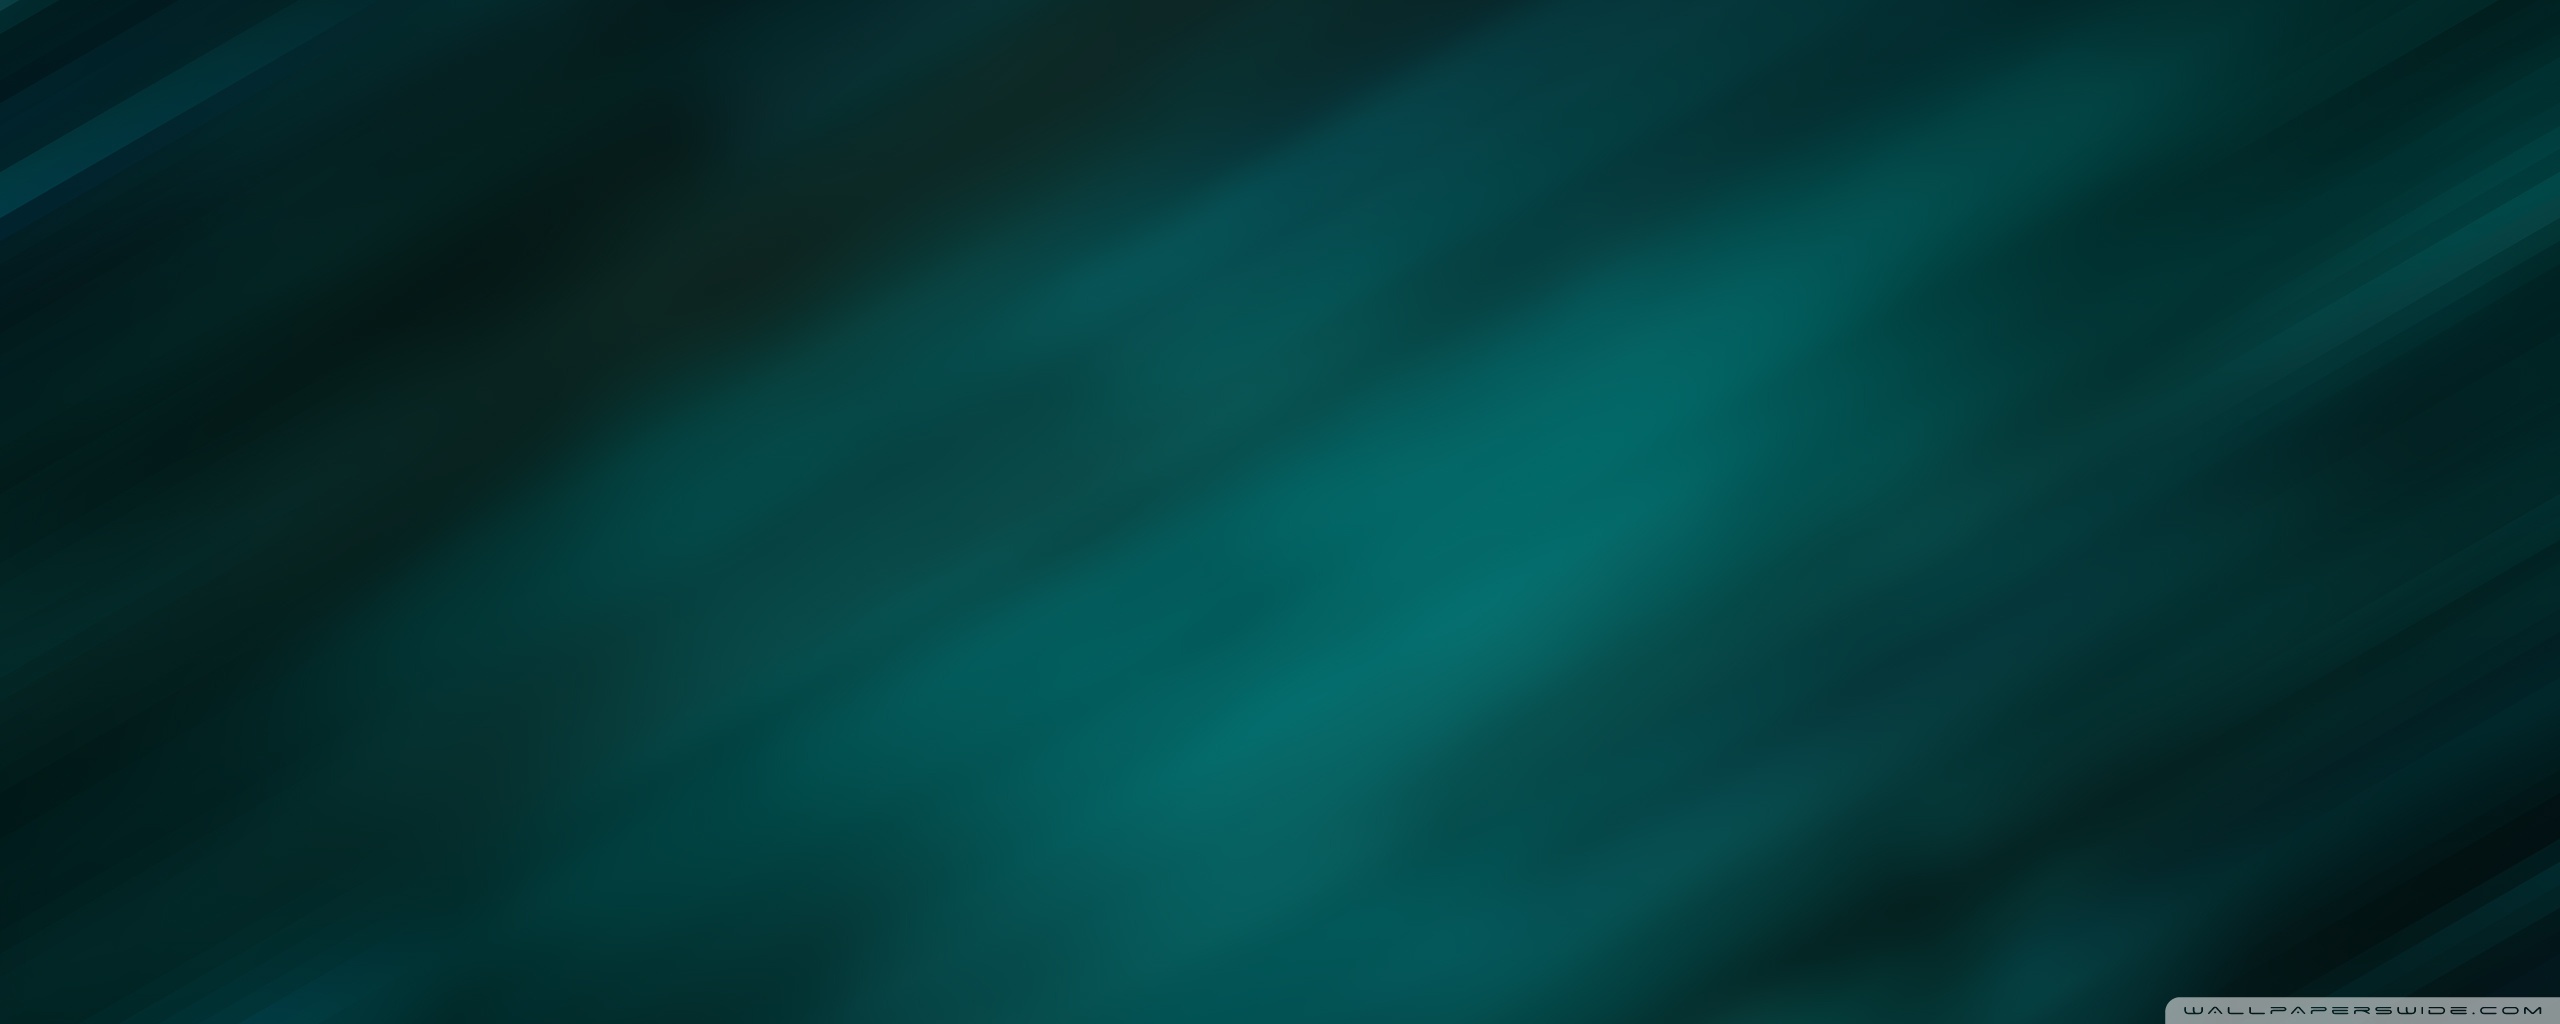 Abstract Teal Ultra HD Desktop Background Wallpaper for 4K UHD TV, Multi Display, Dual Monitor, Tablet